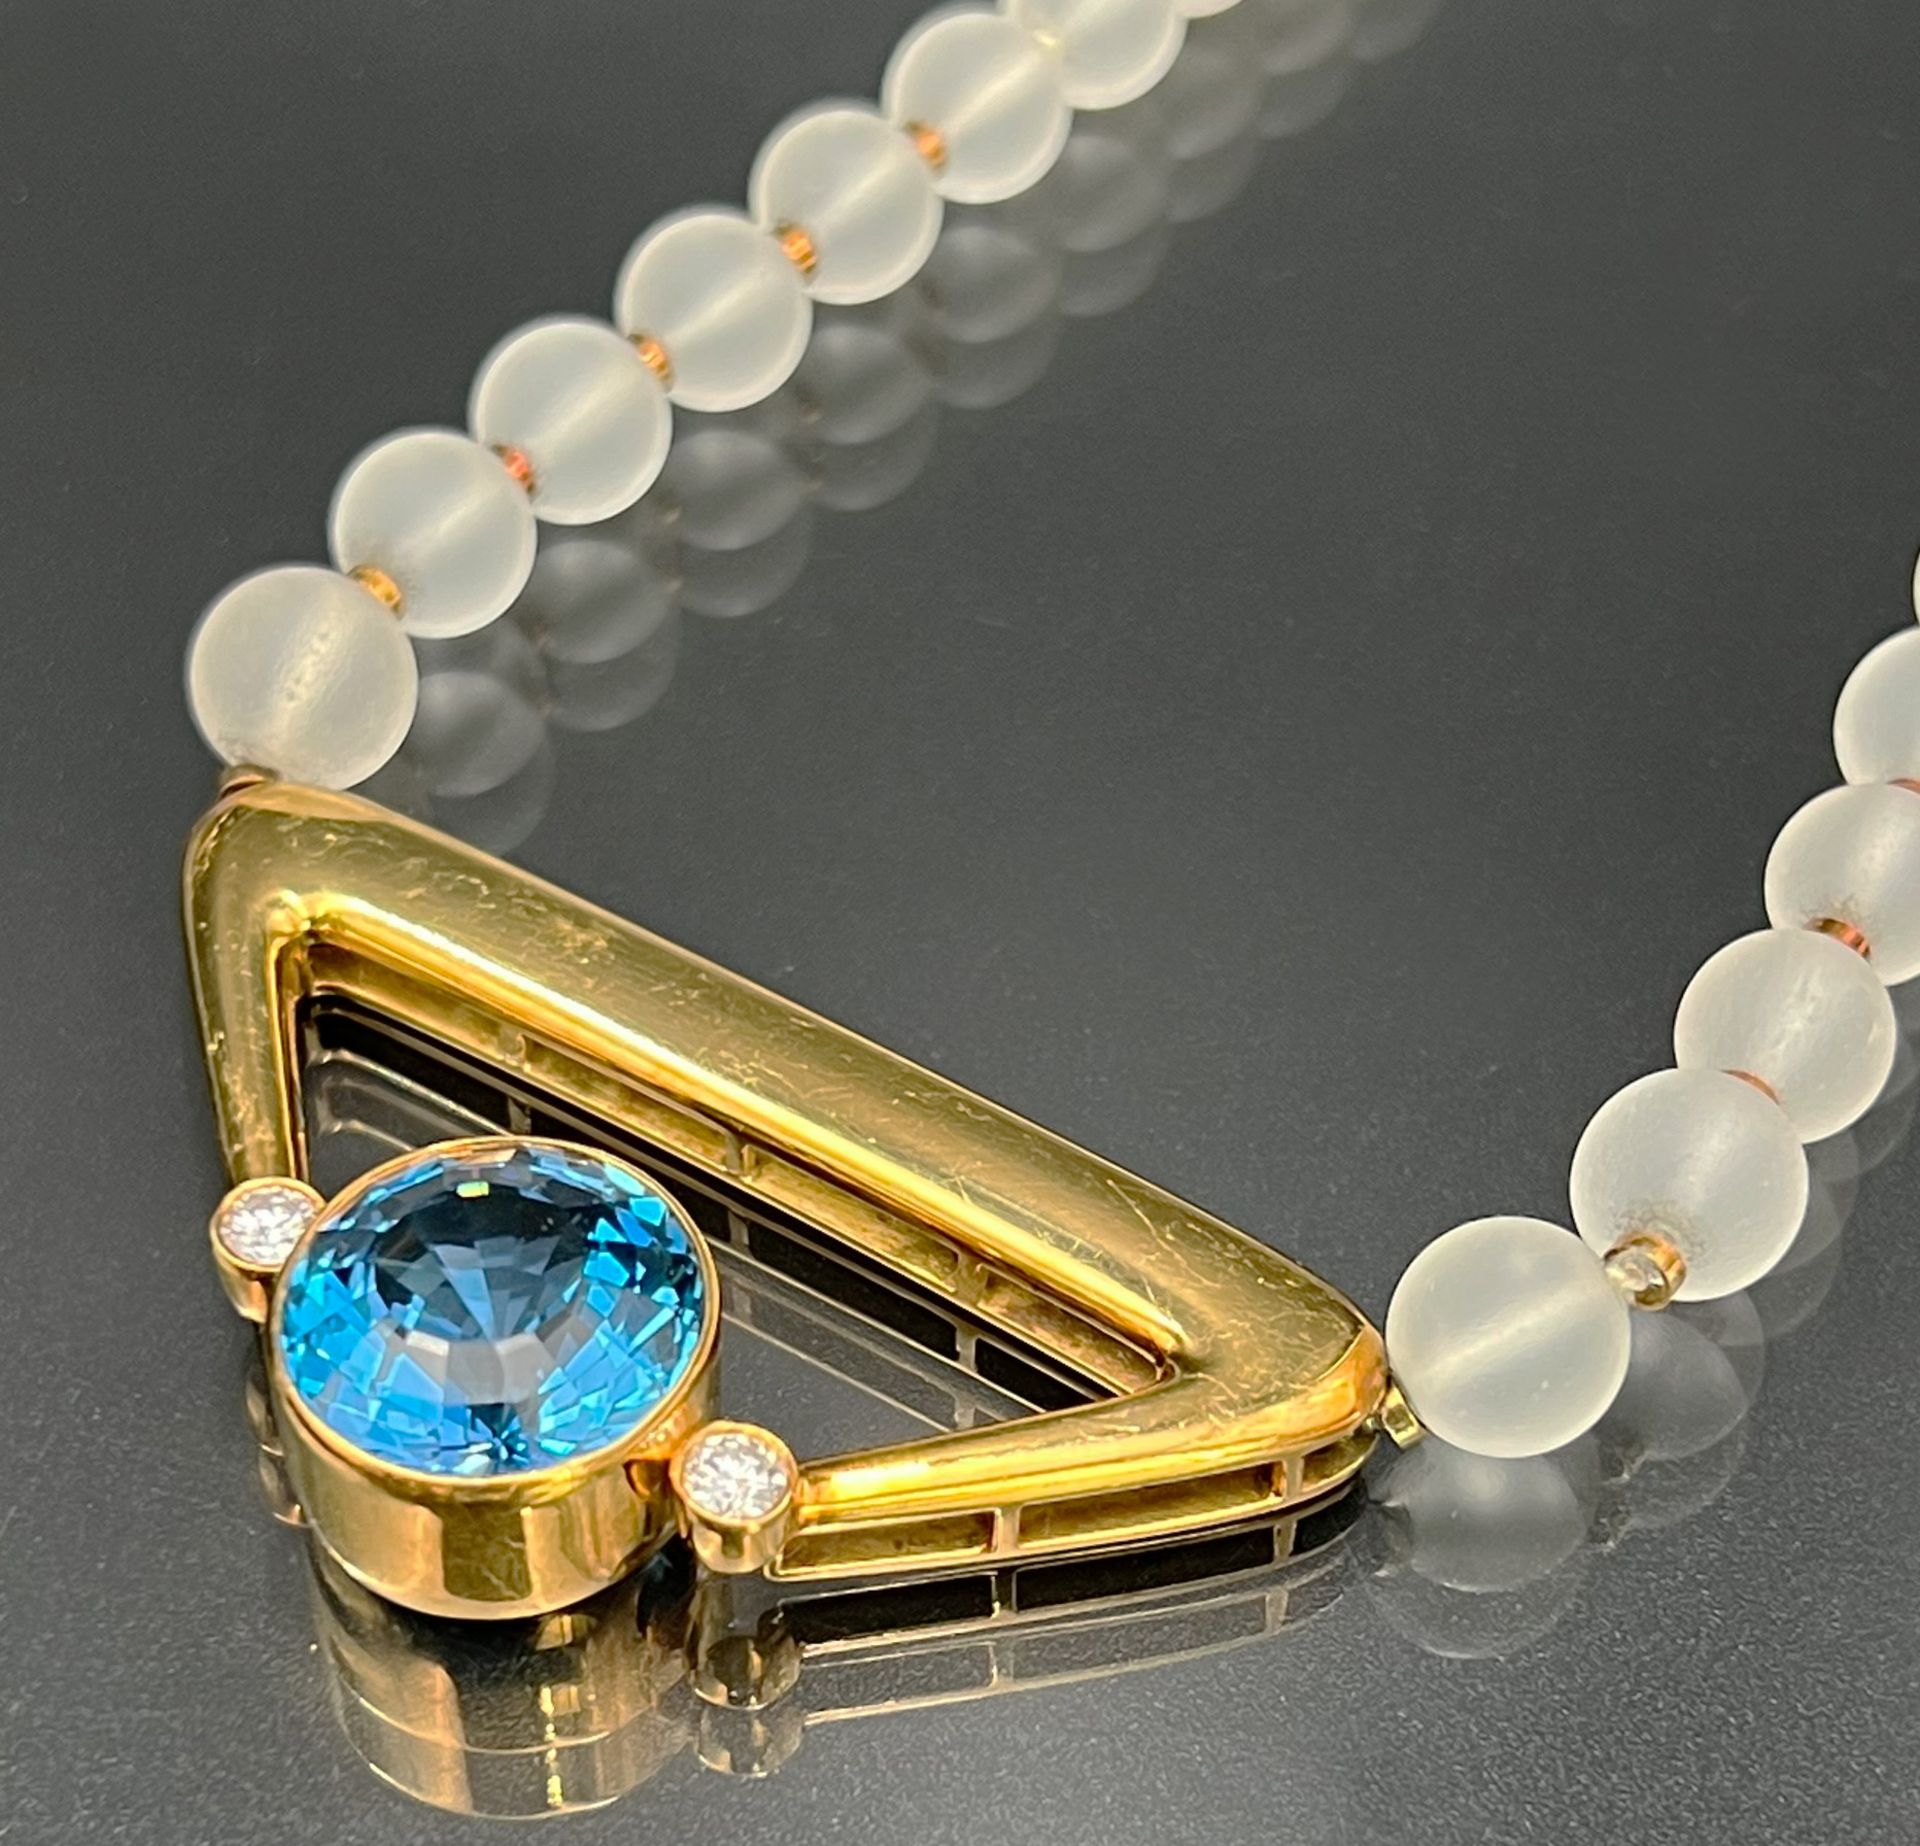 Necklace with rock crystal balls. Centrepiece 750 yellow gold with one topaz and two brilliants.